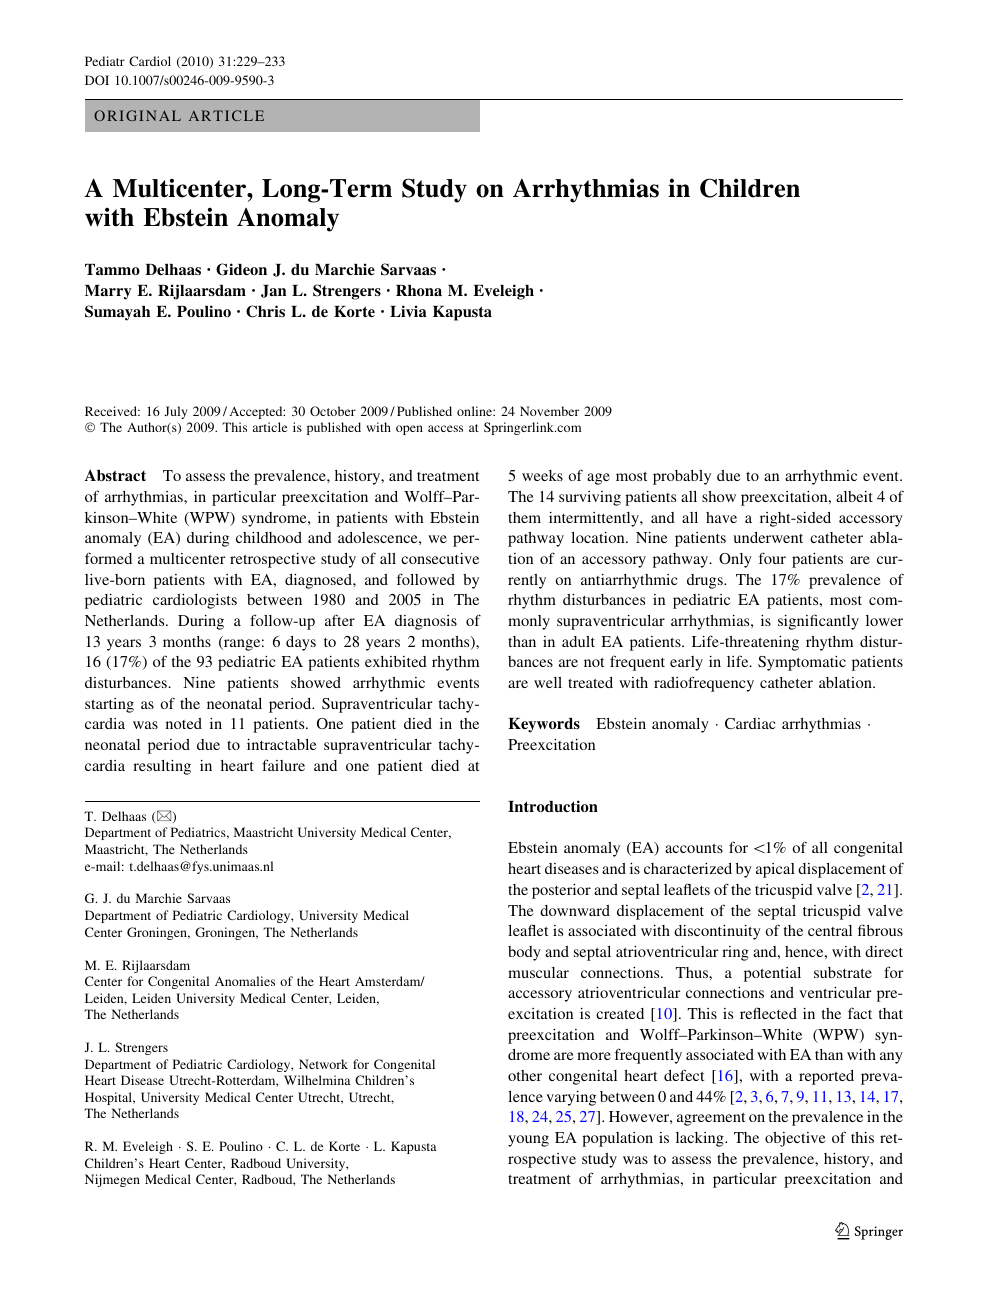 A Multicenter Long Term Study On Arrhythmias In Children With Ebstein Anomaly Topic Of Research Paper In Clinical Medicine Download Scholarly Article Pdf And Read For Free On Cyberleninka Open Science Hub